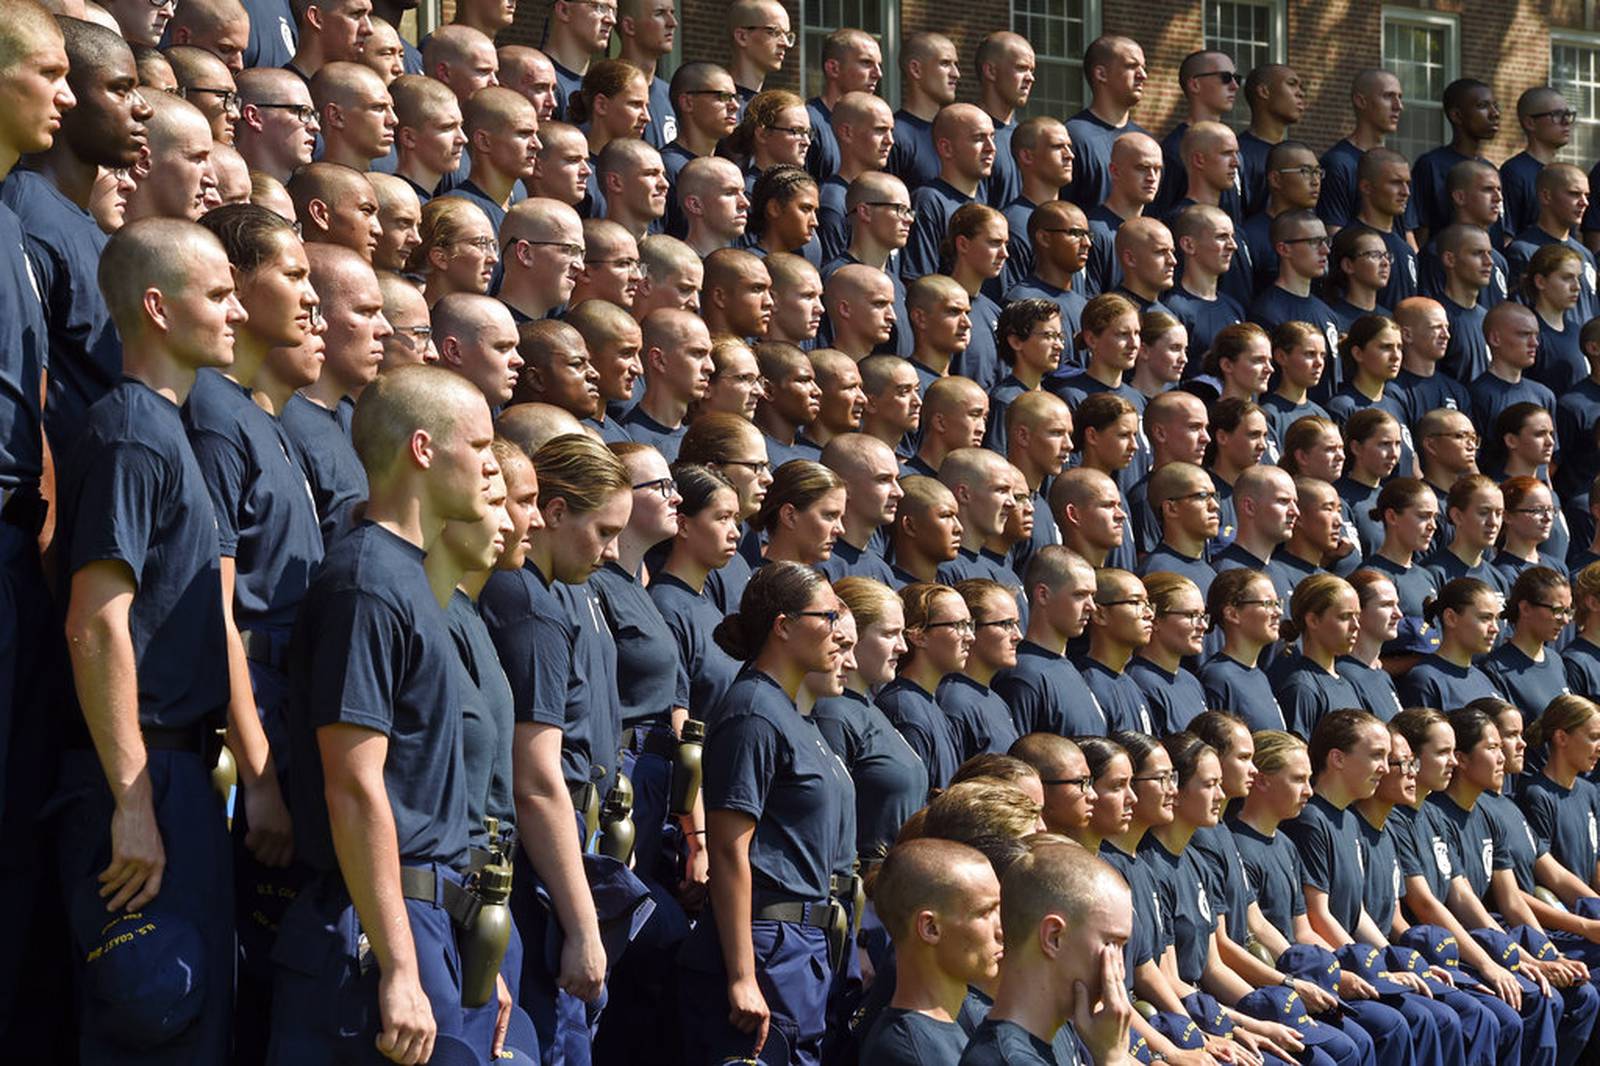 Cadets turn out at Coast Guard Academy for start of training